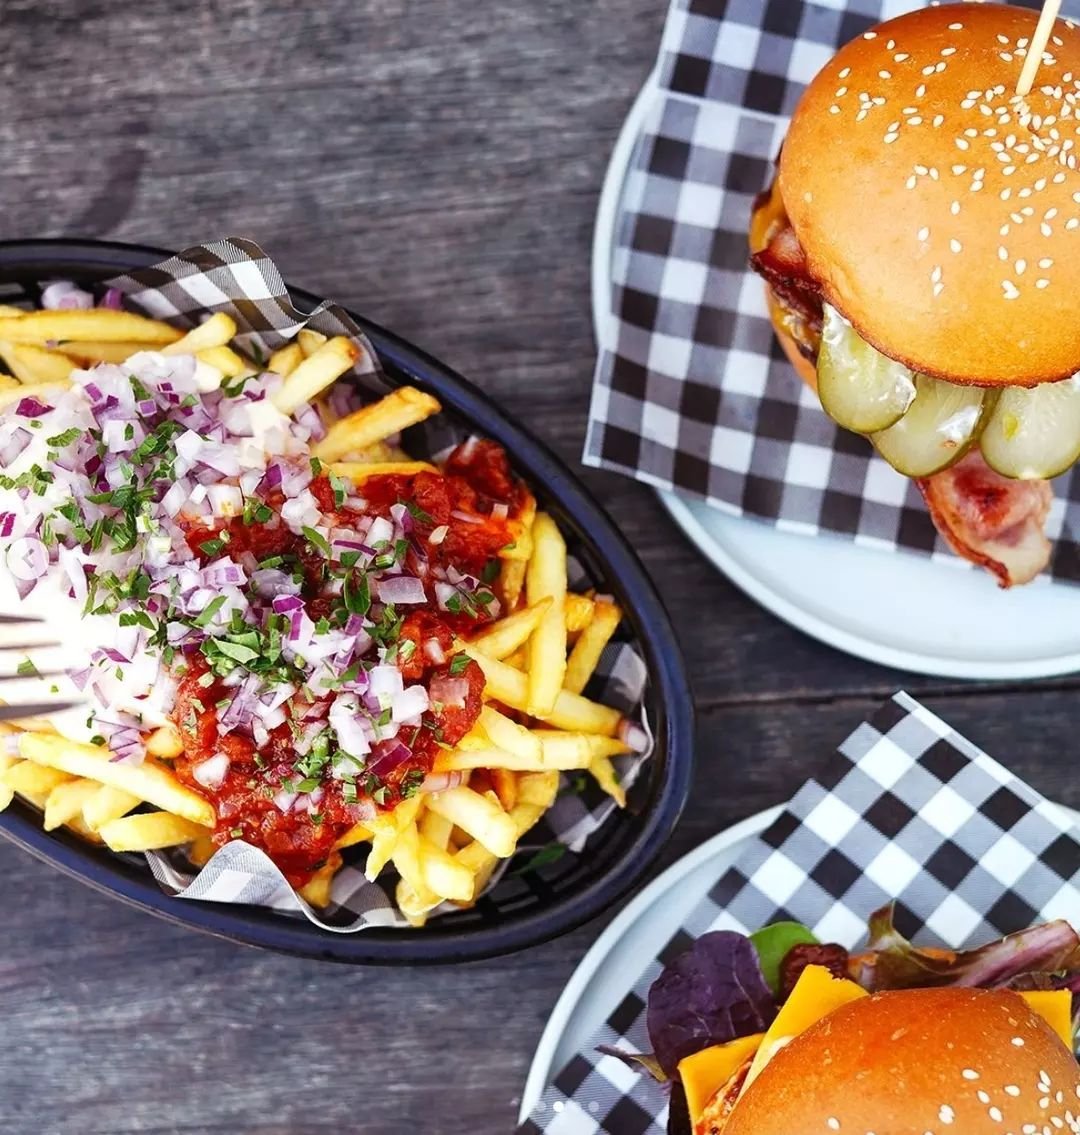 Just when you thought the humble hot chip could not get better, enter our Dutch Fries&nbsp;🇳🇱&nbsp;so deliciously moreish, this one's hard to share 🤤

🍟 Hot Chips topped with mayo, chopped red onion &amp; relish